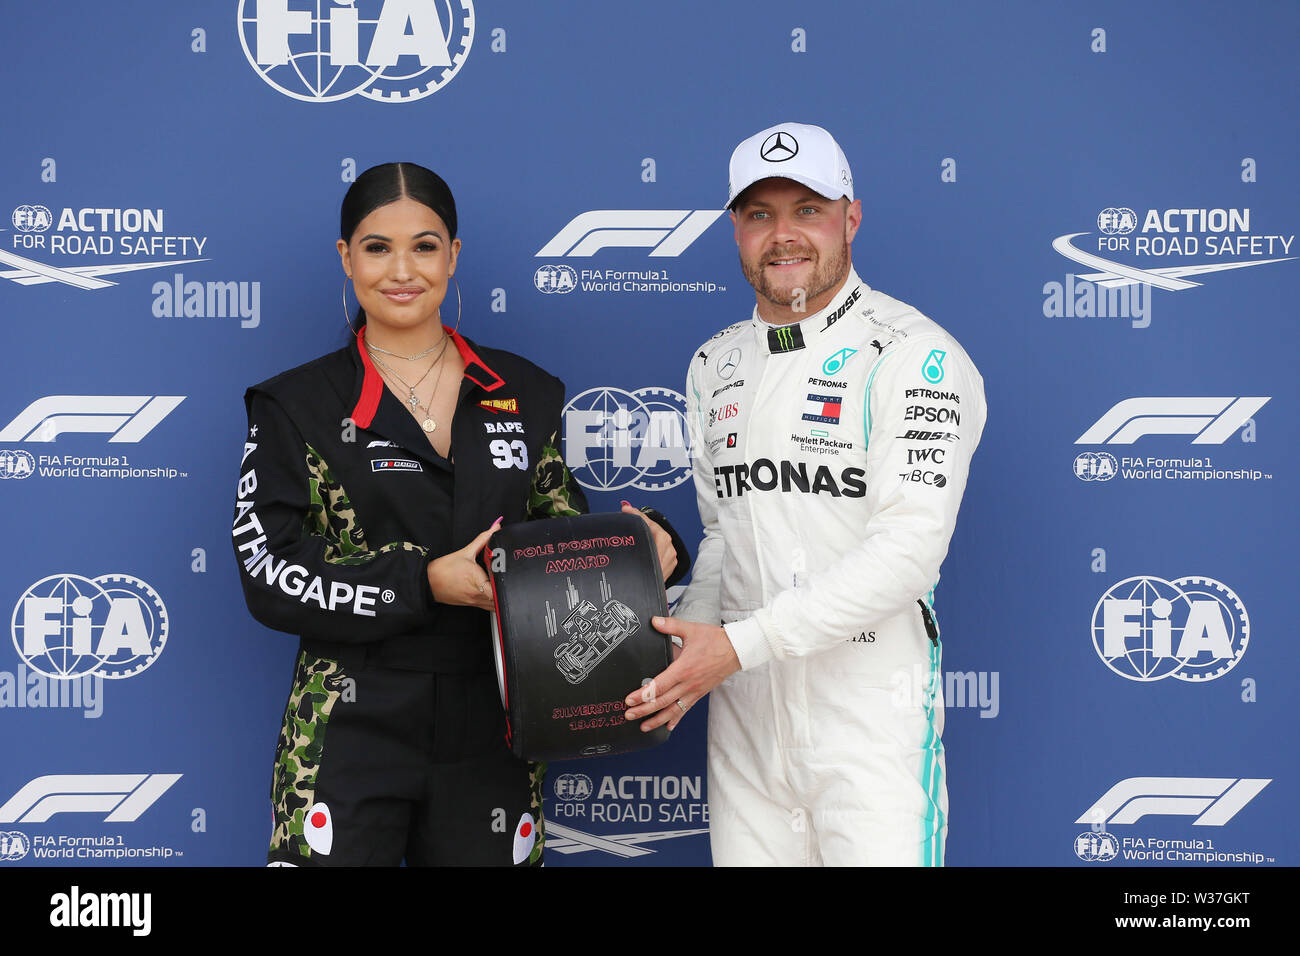 &#xa9; Photo4 / LaPresse13/07/2019 Silverstone, England Sport Grand Prix Formula  One England 2019 In the pic: Pole Position Pirelli Award, Mabel (GBR)  Singer and Songwriter with Valtteri Bottas (FIN) Mercedes AMG F1